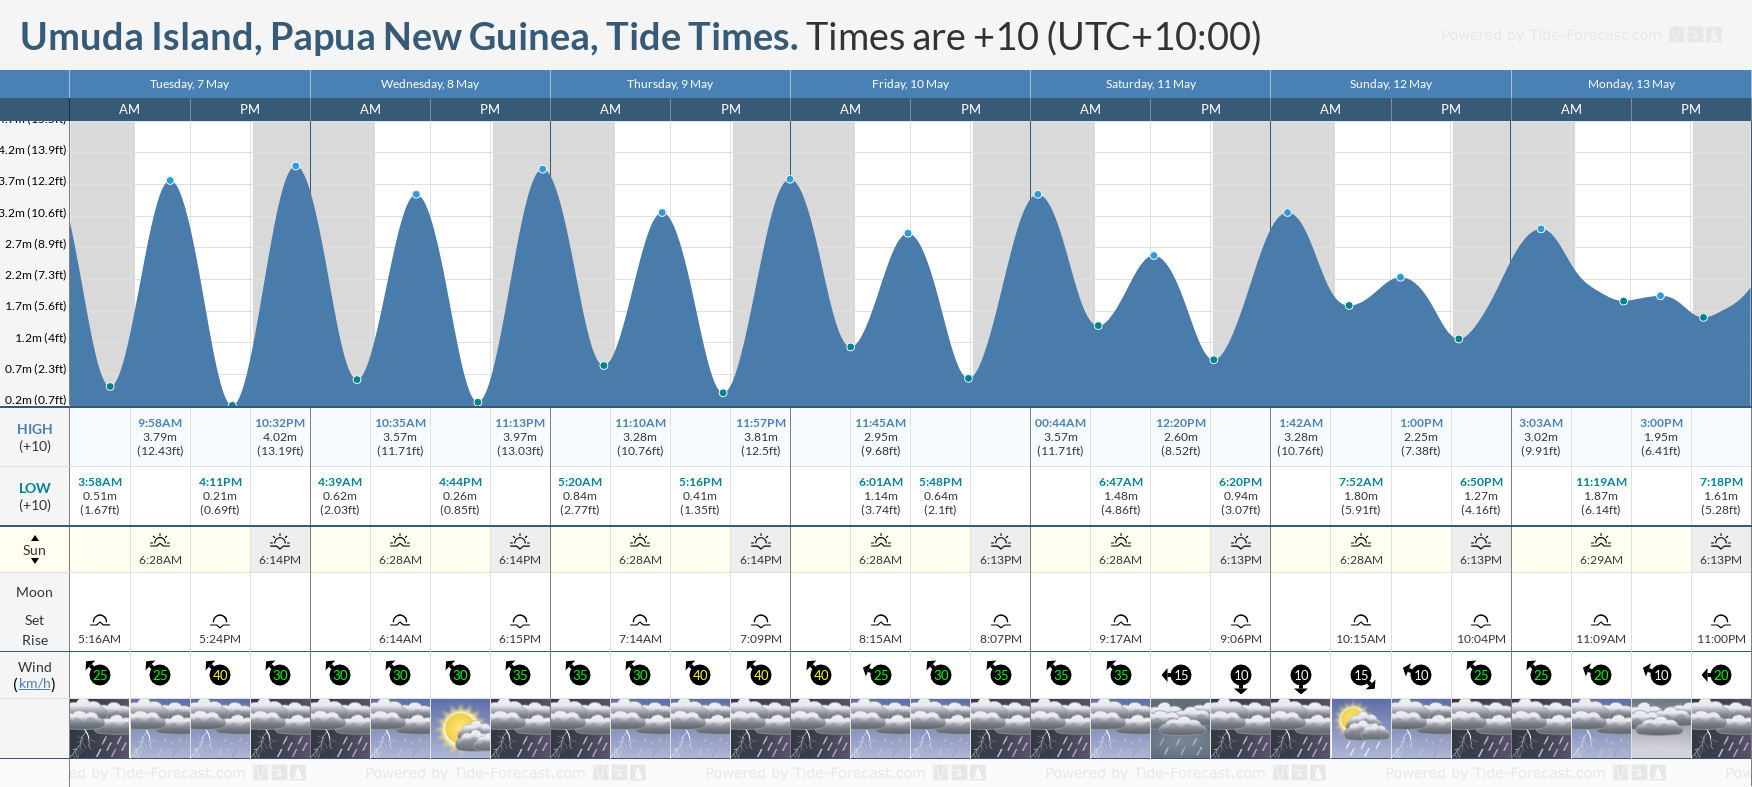 Umuda Island, Papua New Guinea Tide Chart including high and low tide tide times for the next 7 days